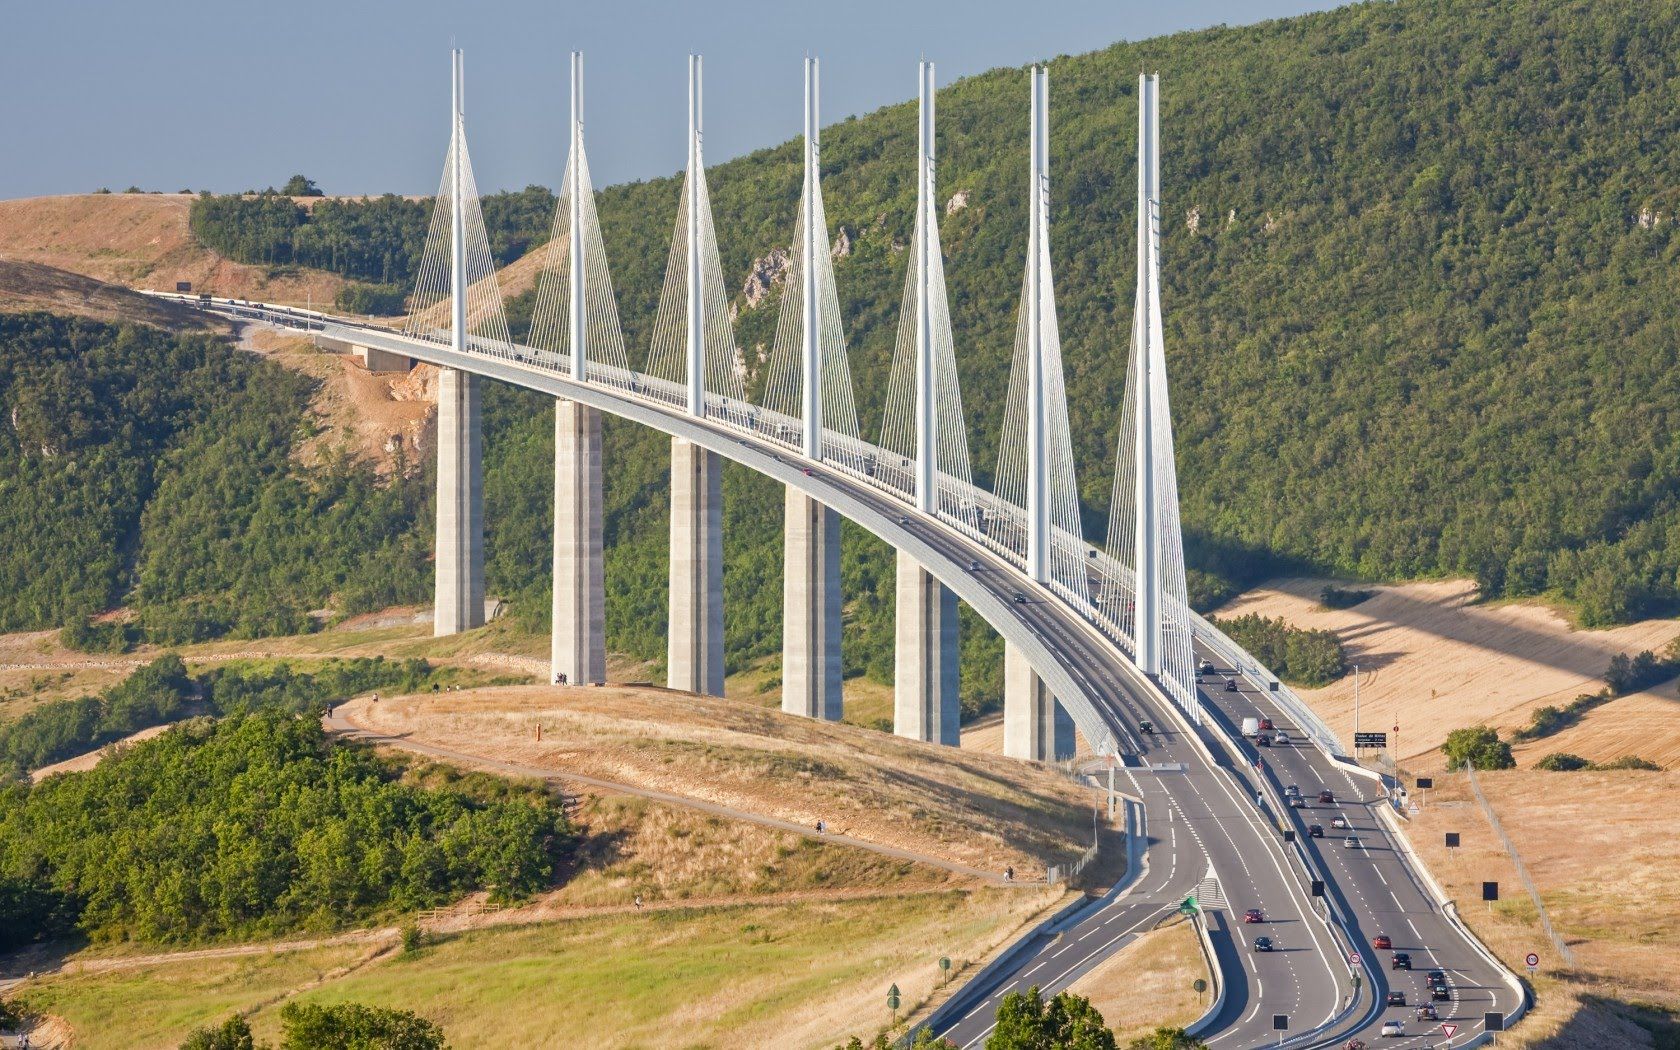 The Tallest Bridge in the World, Millau Viaduct, France - YouTube